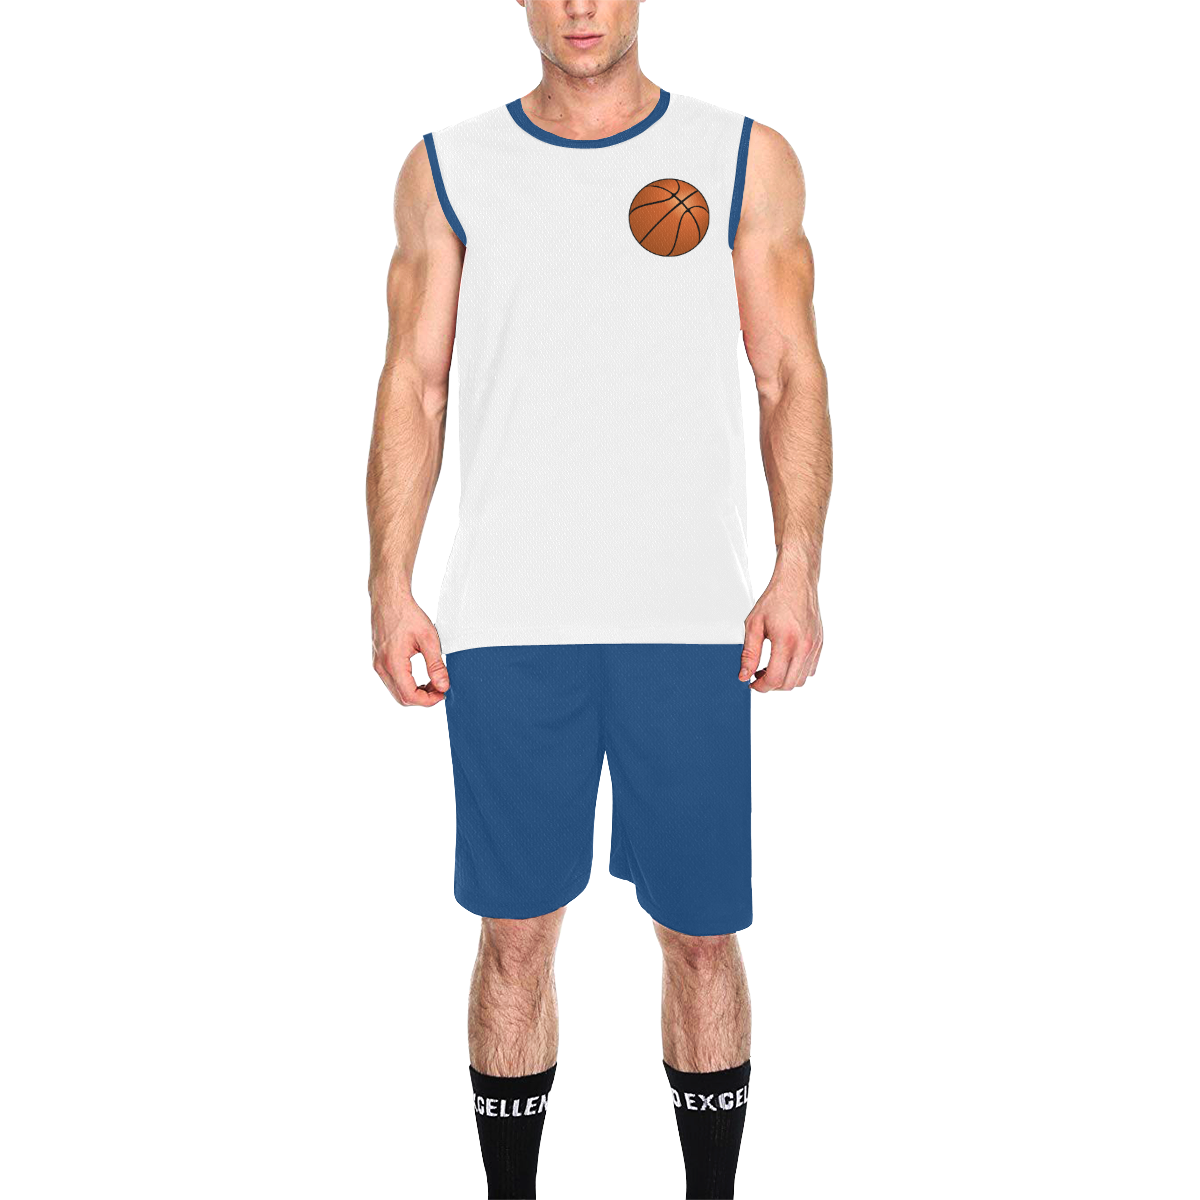 Basketball Sports Cerulean Blue and White All Over Print Basketball Uniform